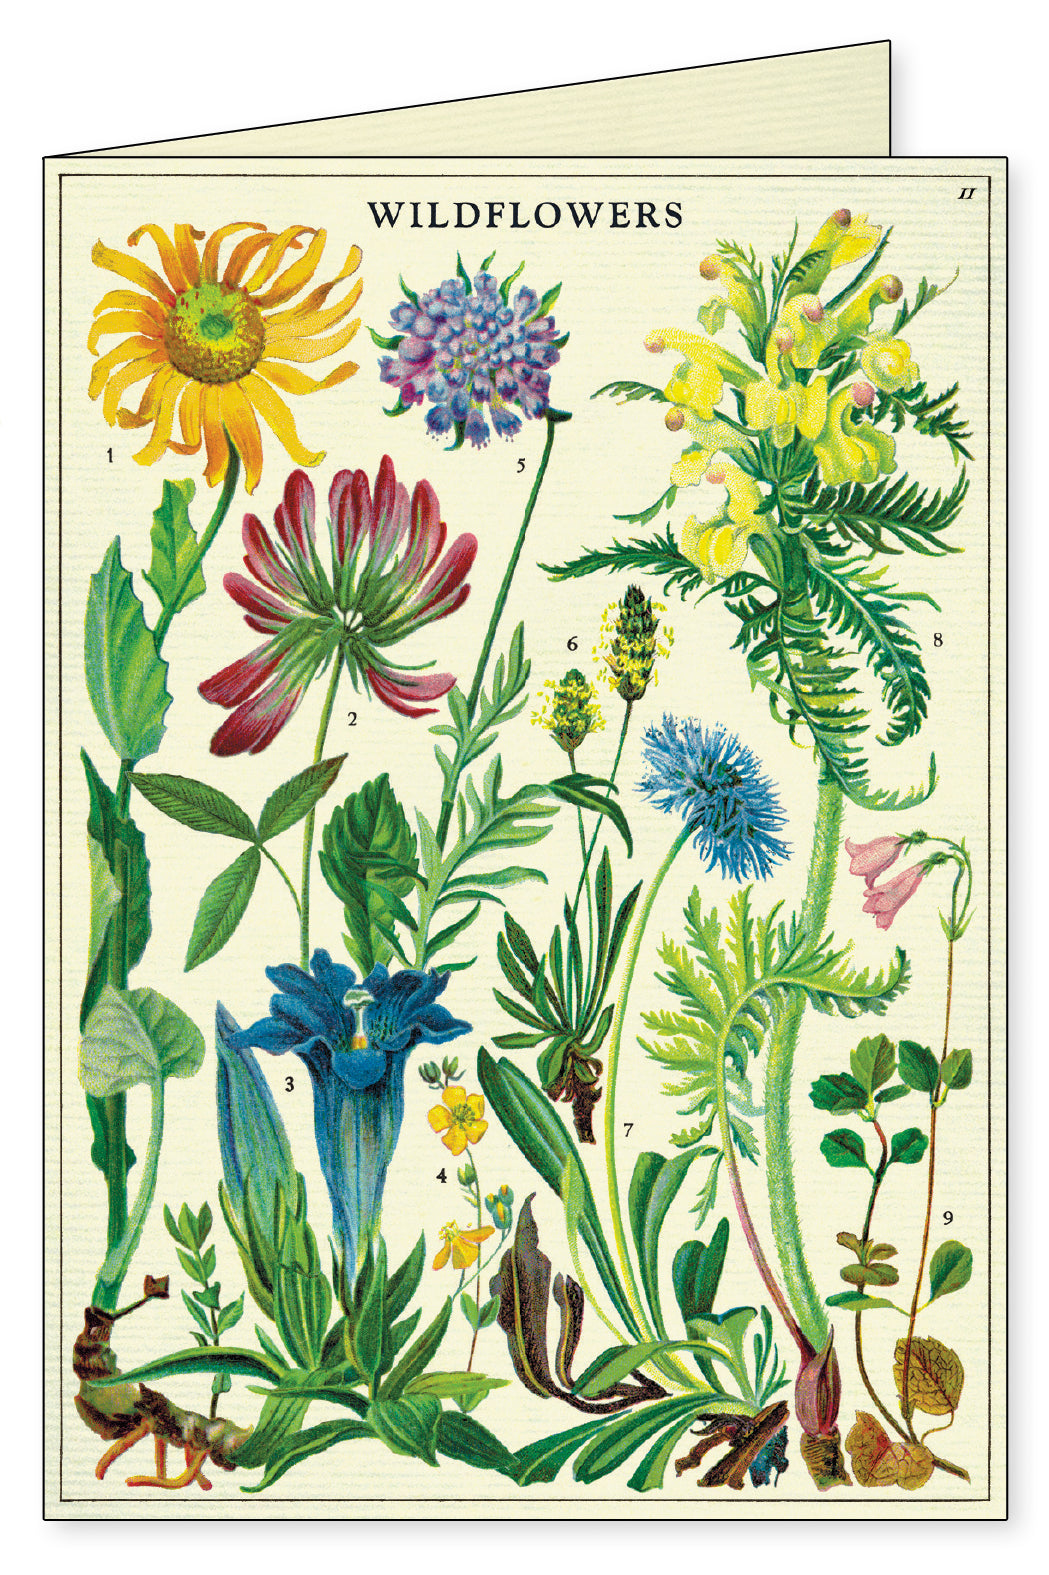 Boxed notecards by Cavallini & Co. are perfect for everyday greetings, as a thank you card, or as a gift card.